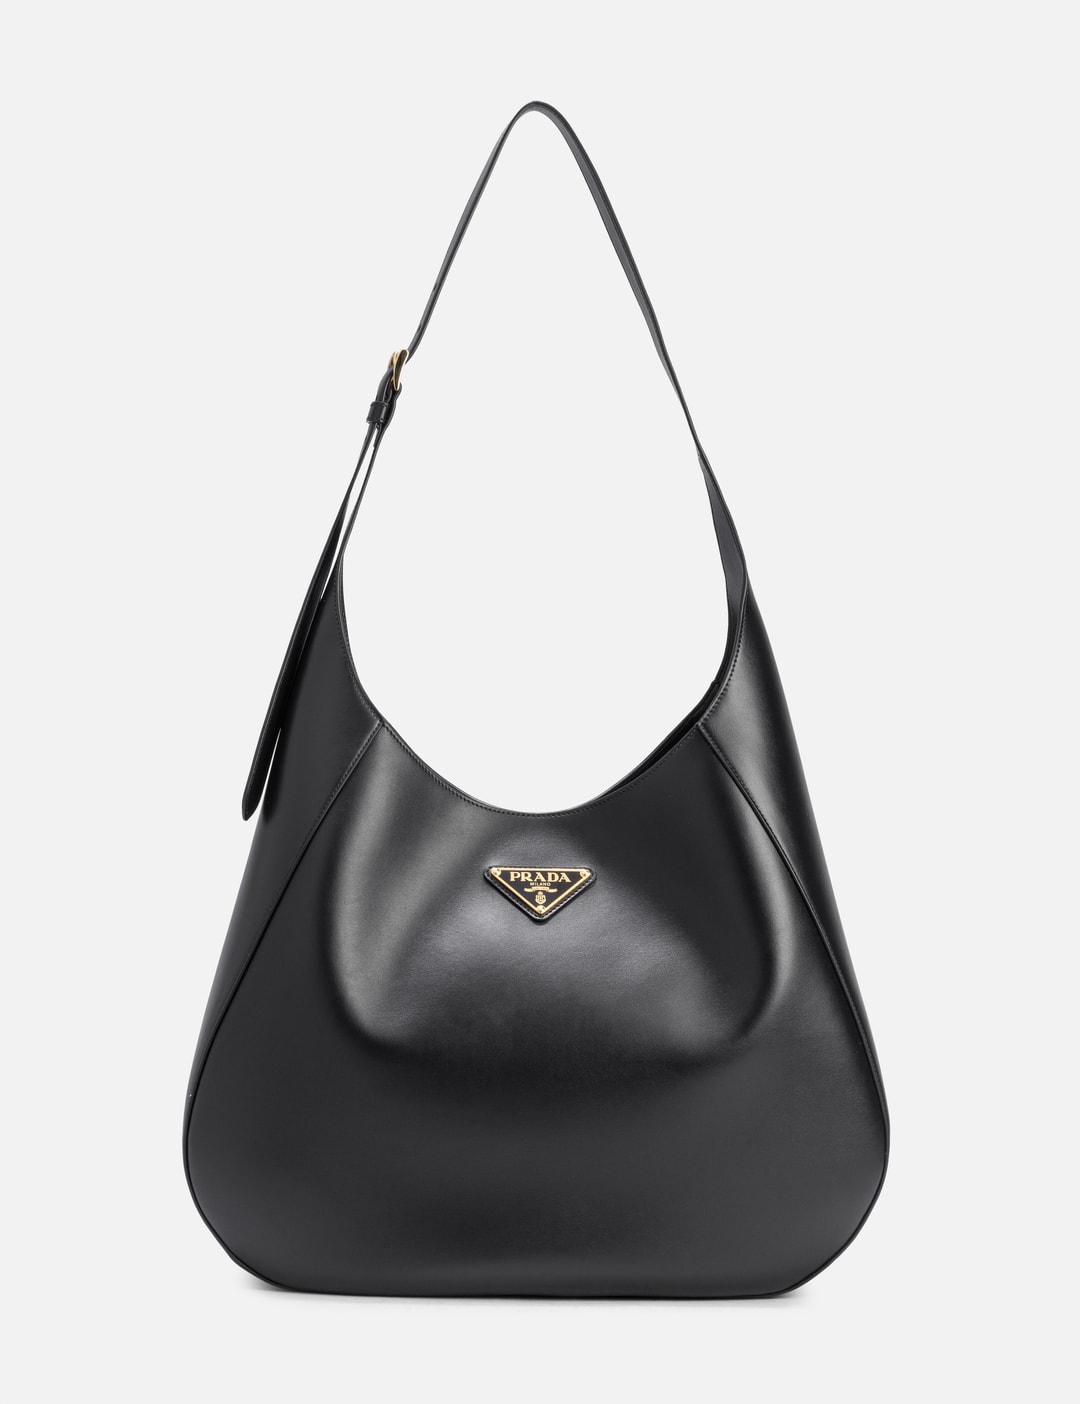 Prada - Large Leather Shoulder Bag With Top Stitching